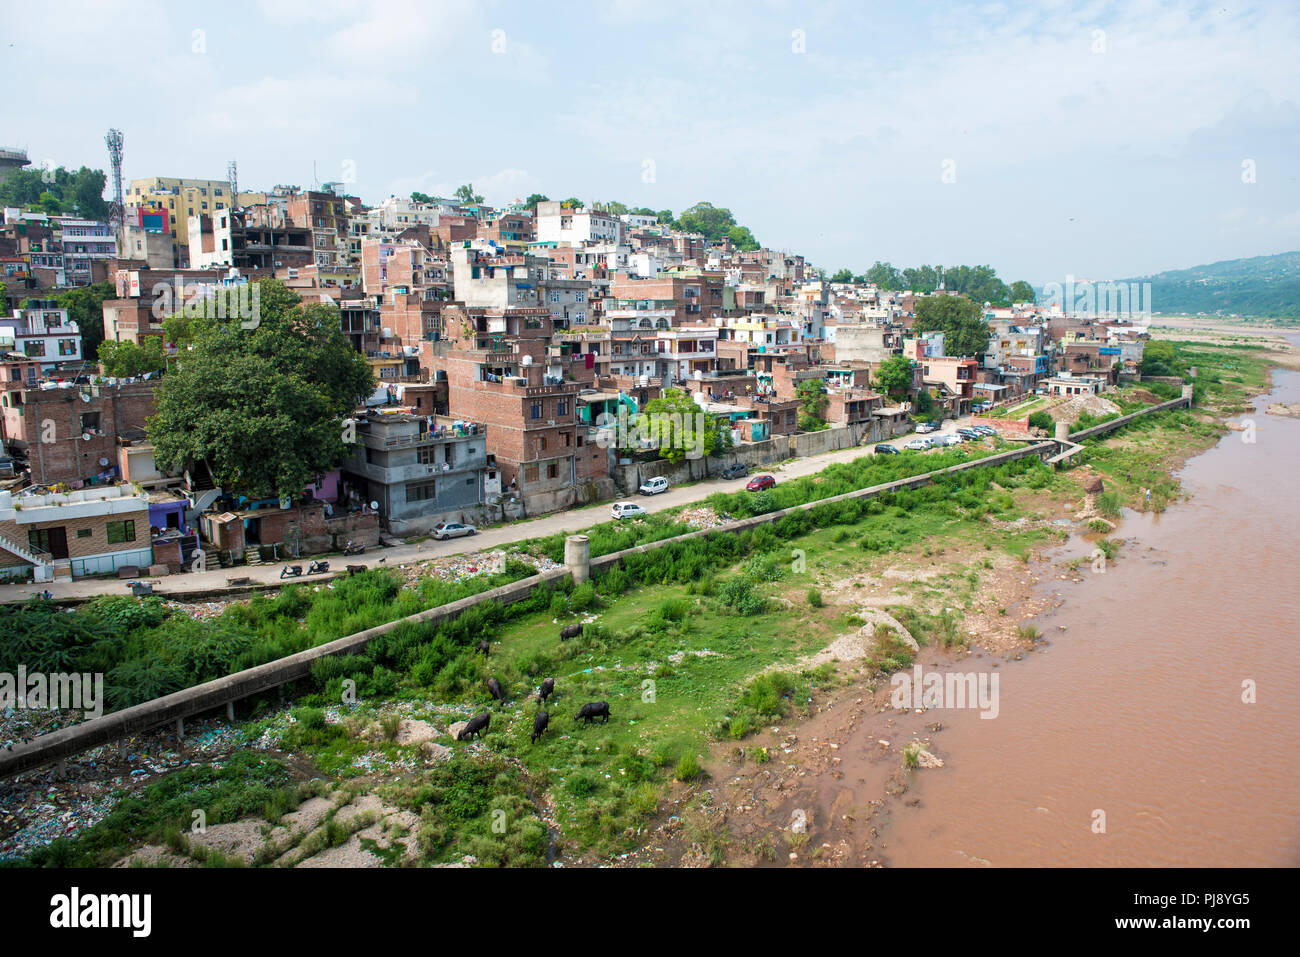 2018 View of Jammu city and the Tawi River at Jammu and Kashmir India Stock Photo